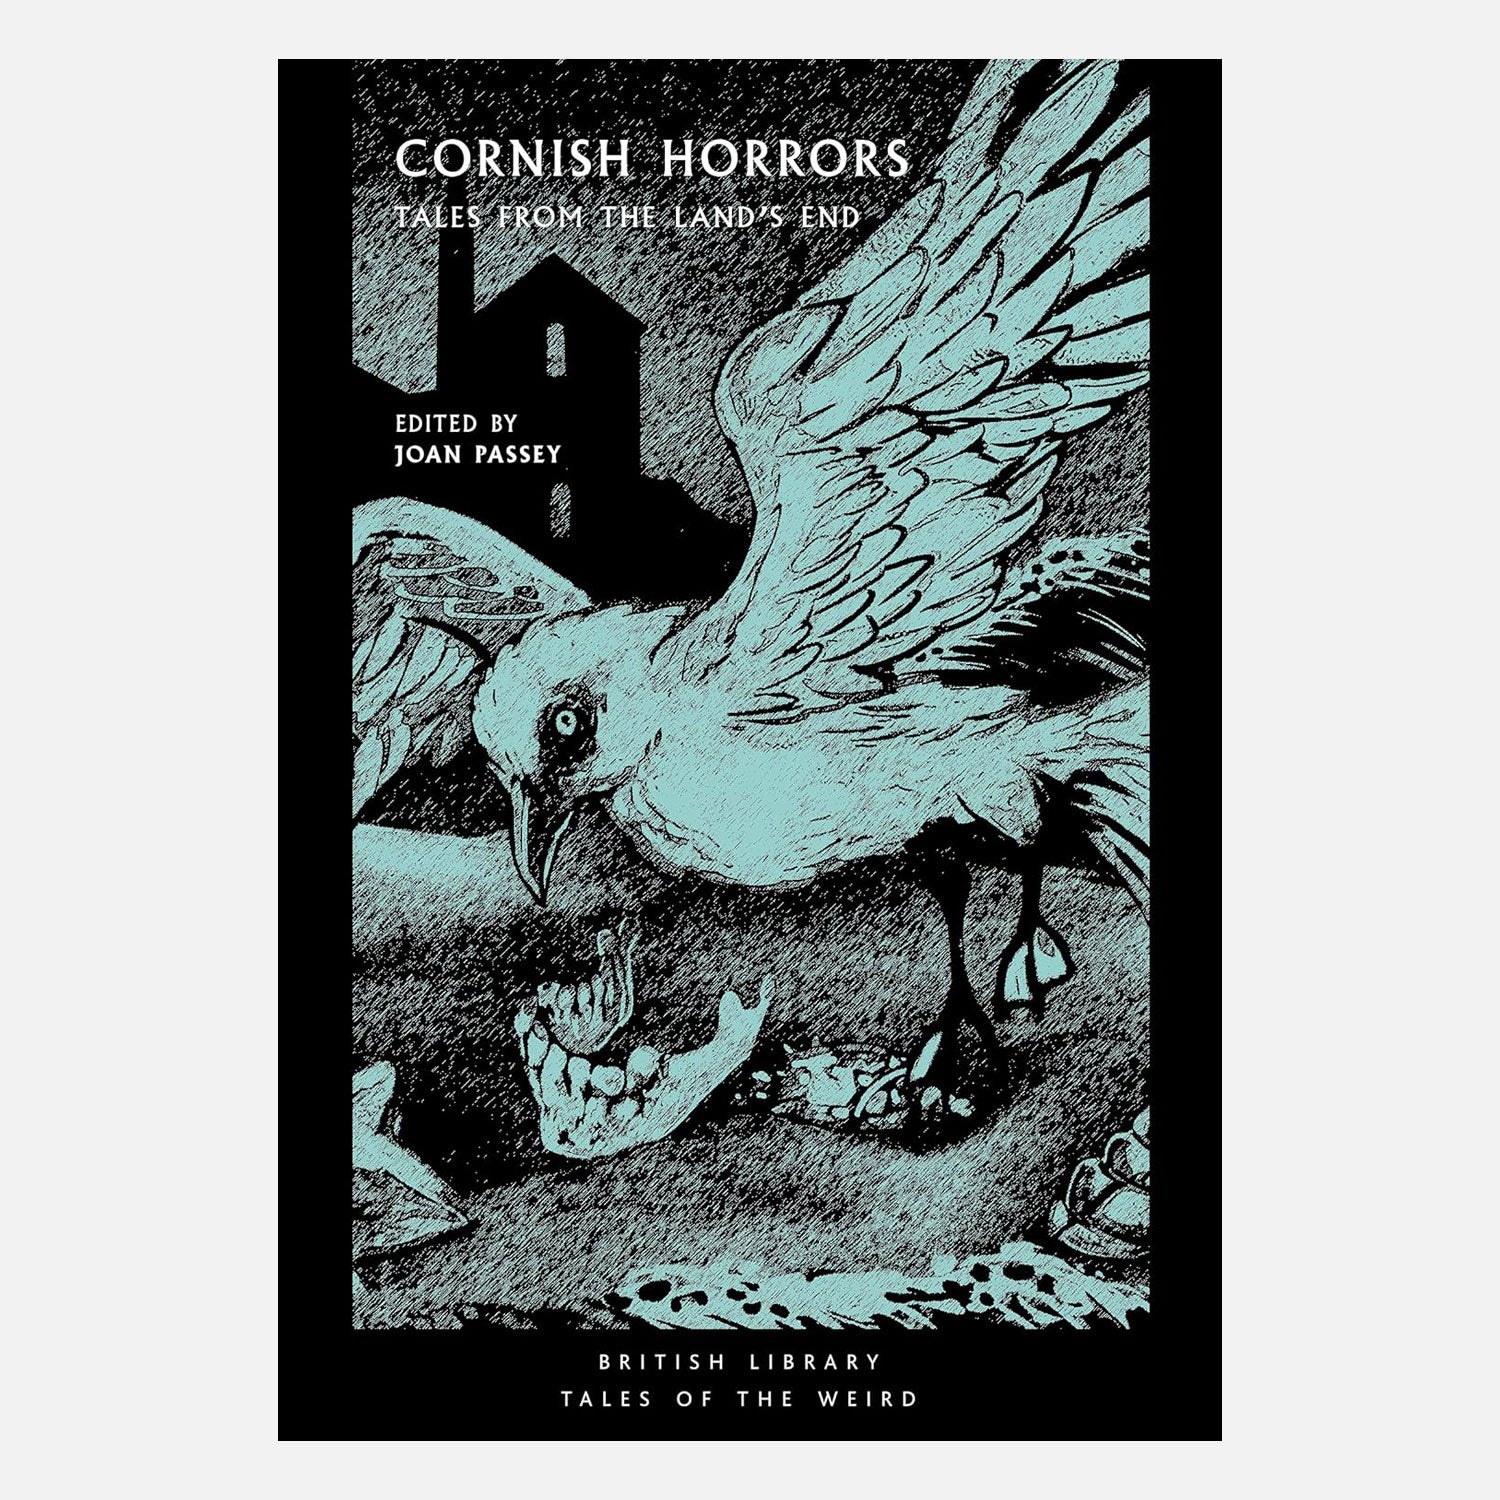 Cornish Horrors: Tales from the Land's End (Tales of the Weird). British Library, Edited by Joan Passey. Print of an eerie seagull over a jawbone with a silhouette of a mine building in the background.